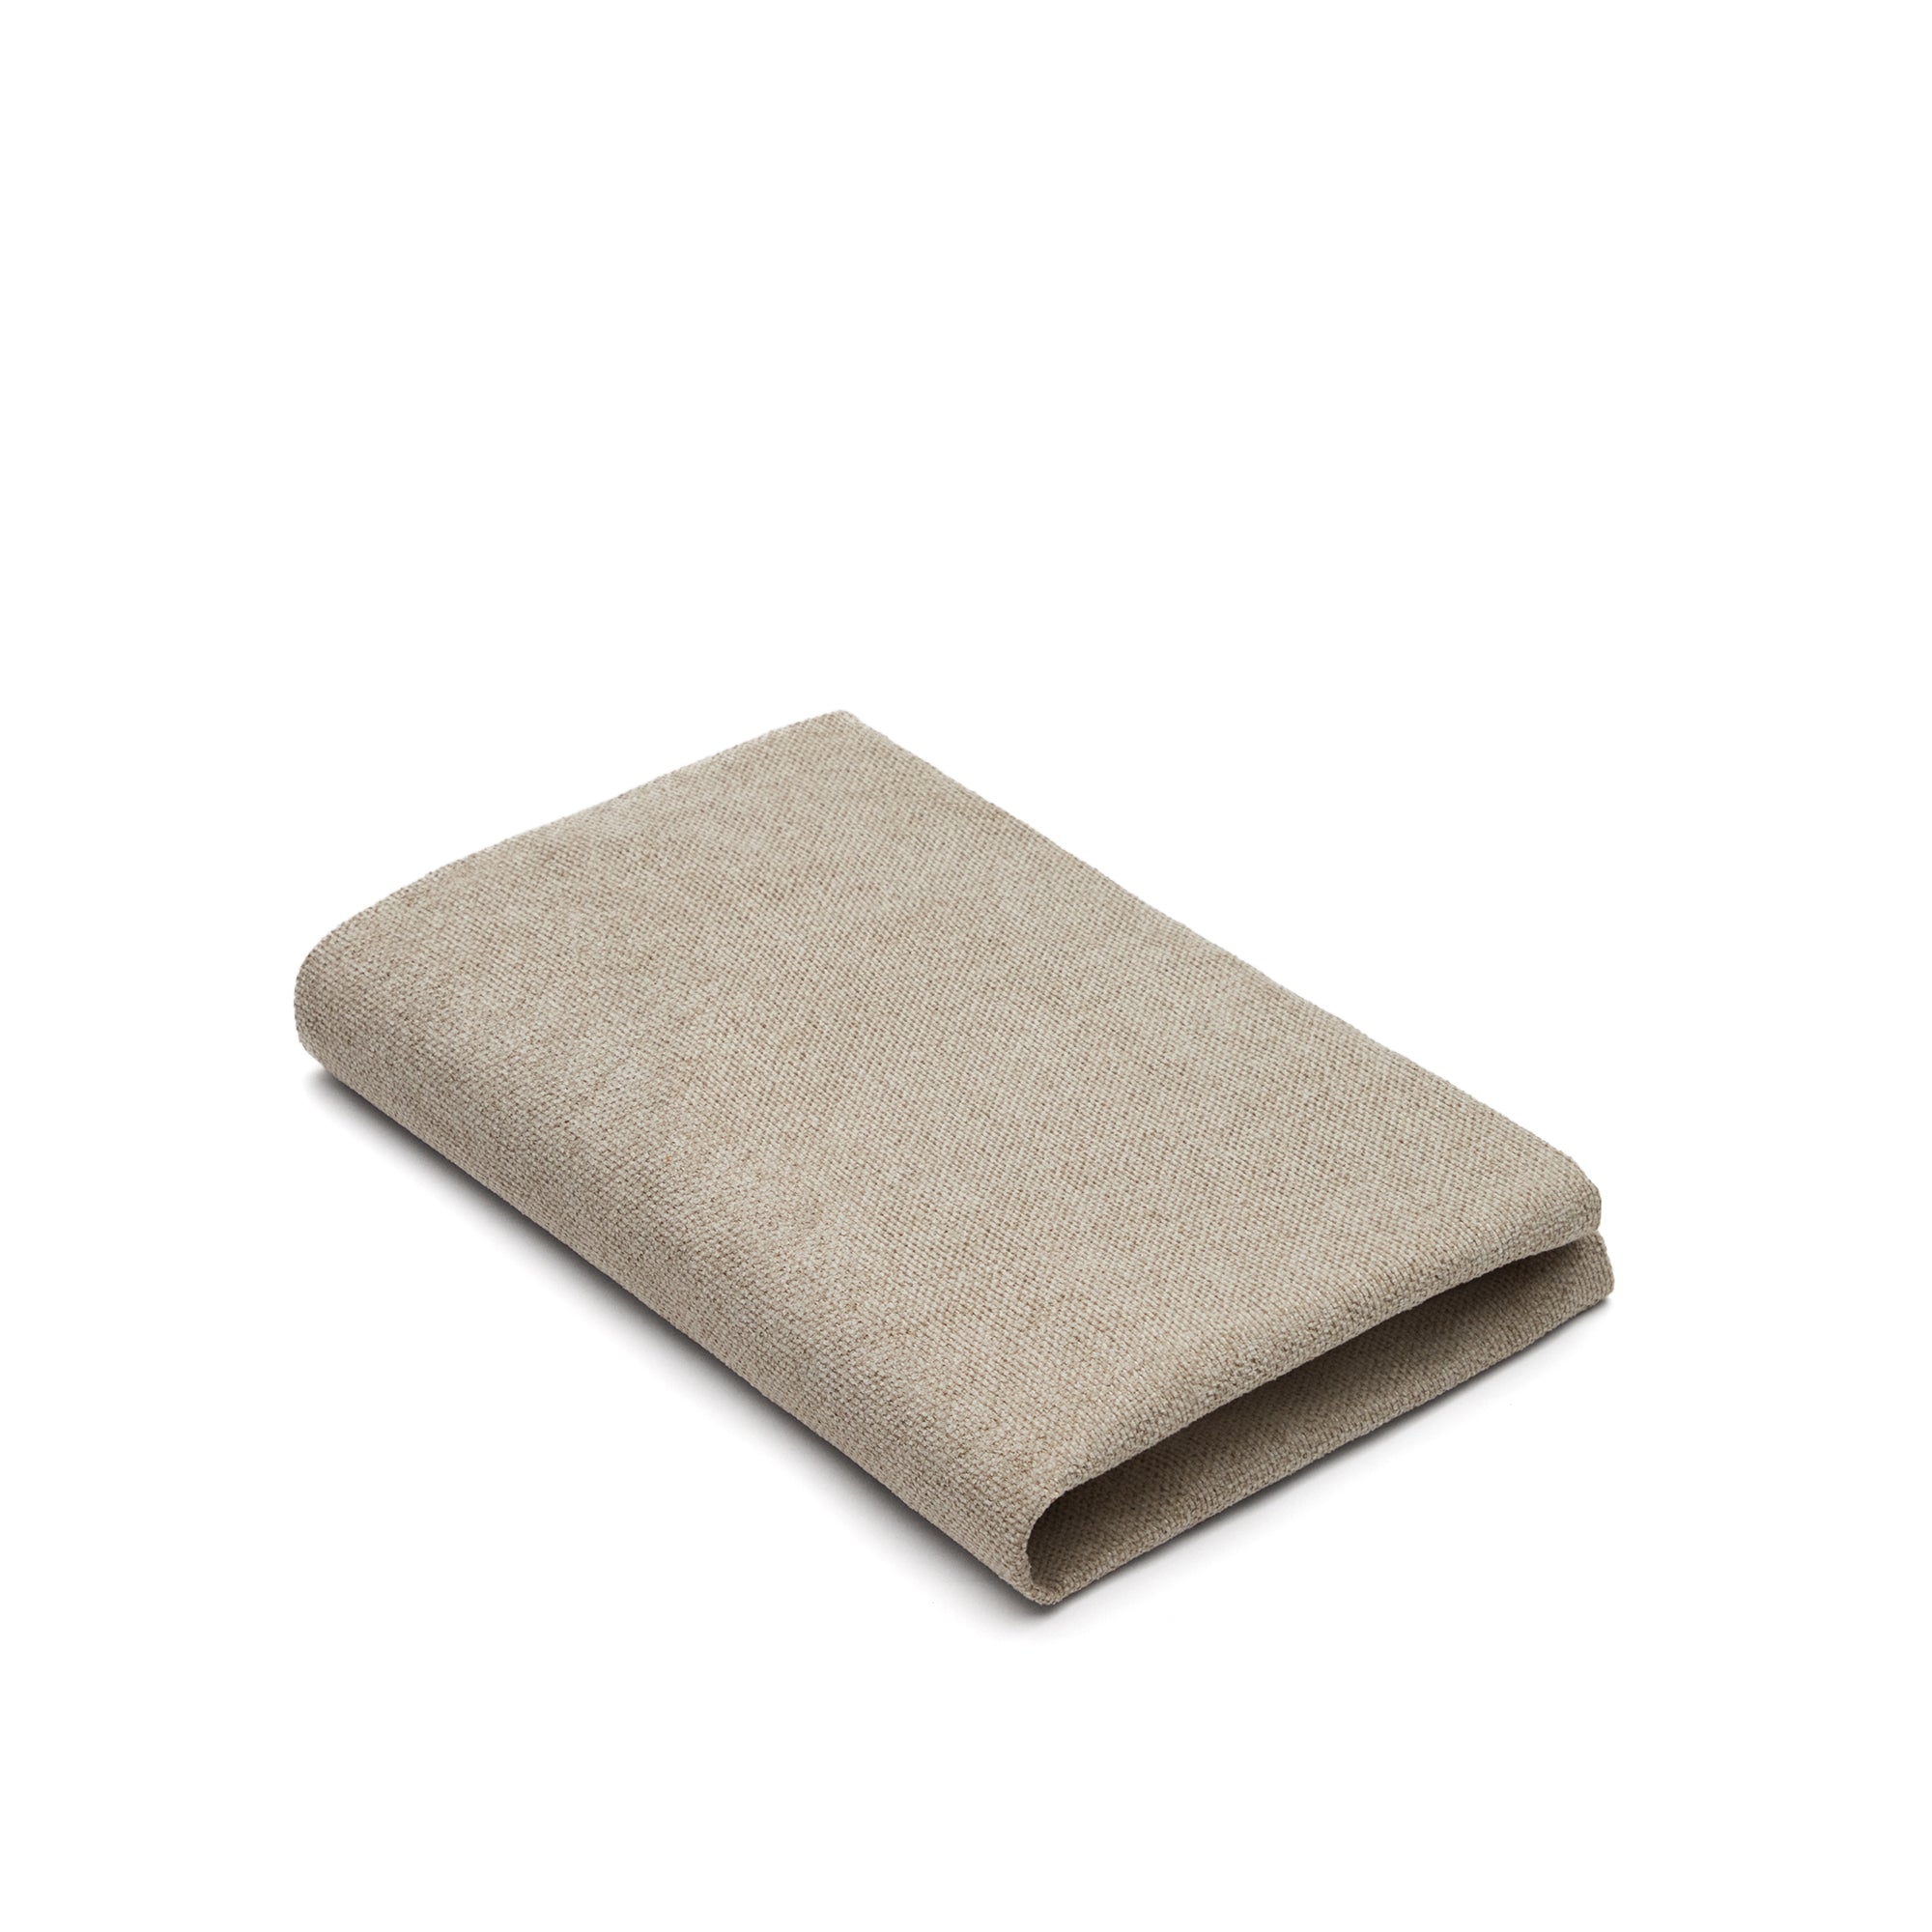 Bowie cover for large bed for pets in beige, 73 x 98 cm